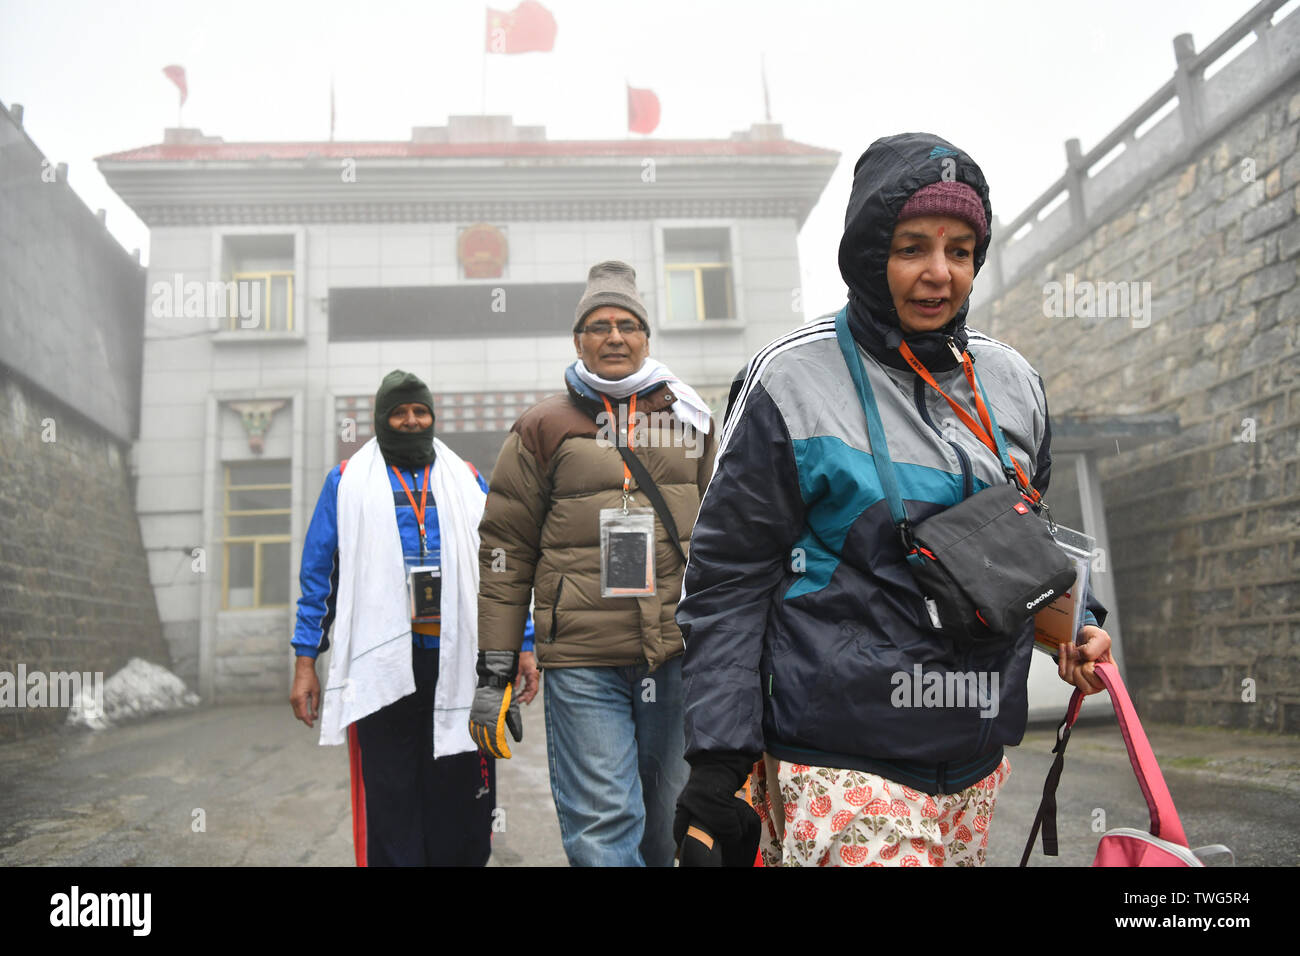 Yadong, China's Tibet Autonomous Region. 20th June, 2019. A group of Indian pilgrims enter China from Nathu La Pass in Yadong County, southwest China's Tibet Autonomous Region, June 20, 2019. The first group of officially organised pilgrims from India this year arrived at Nathu La Pass along the China-India border on Thursday. The 36 members on the pilgrim group will travel to Ali Prefecture for a 12-day pilgrimage around Mount Kangrinboqe and Mapam Yumco Lake, both sacred Hindu and Buddhist sites. Credit: Li Xin/Xinhua/Alamy Live News Stock Photo